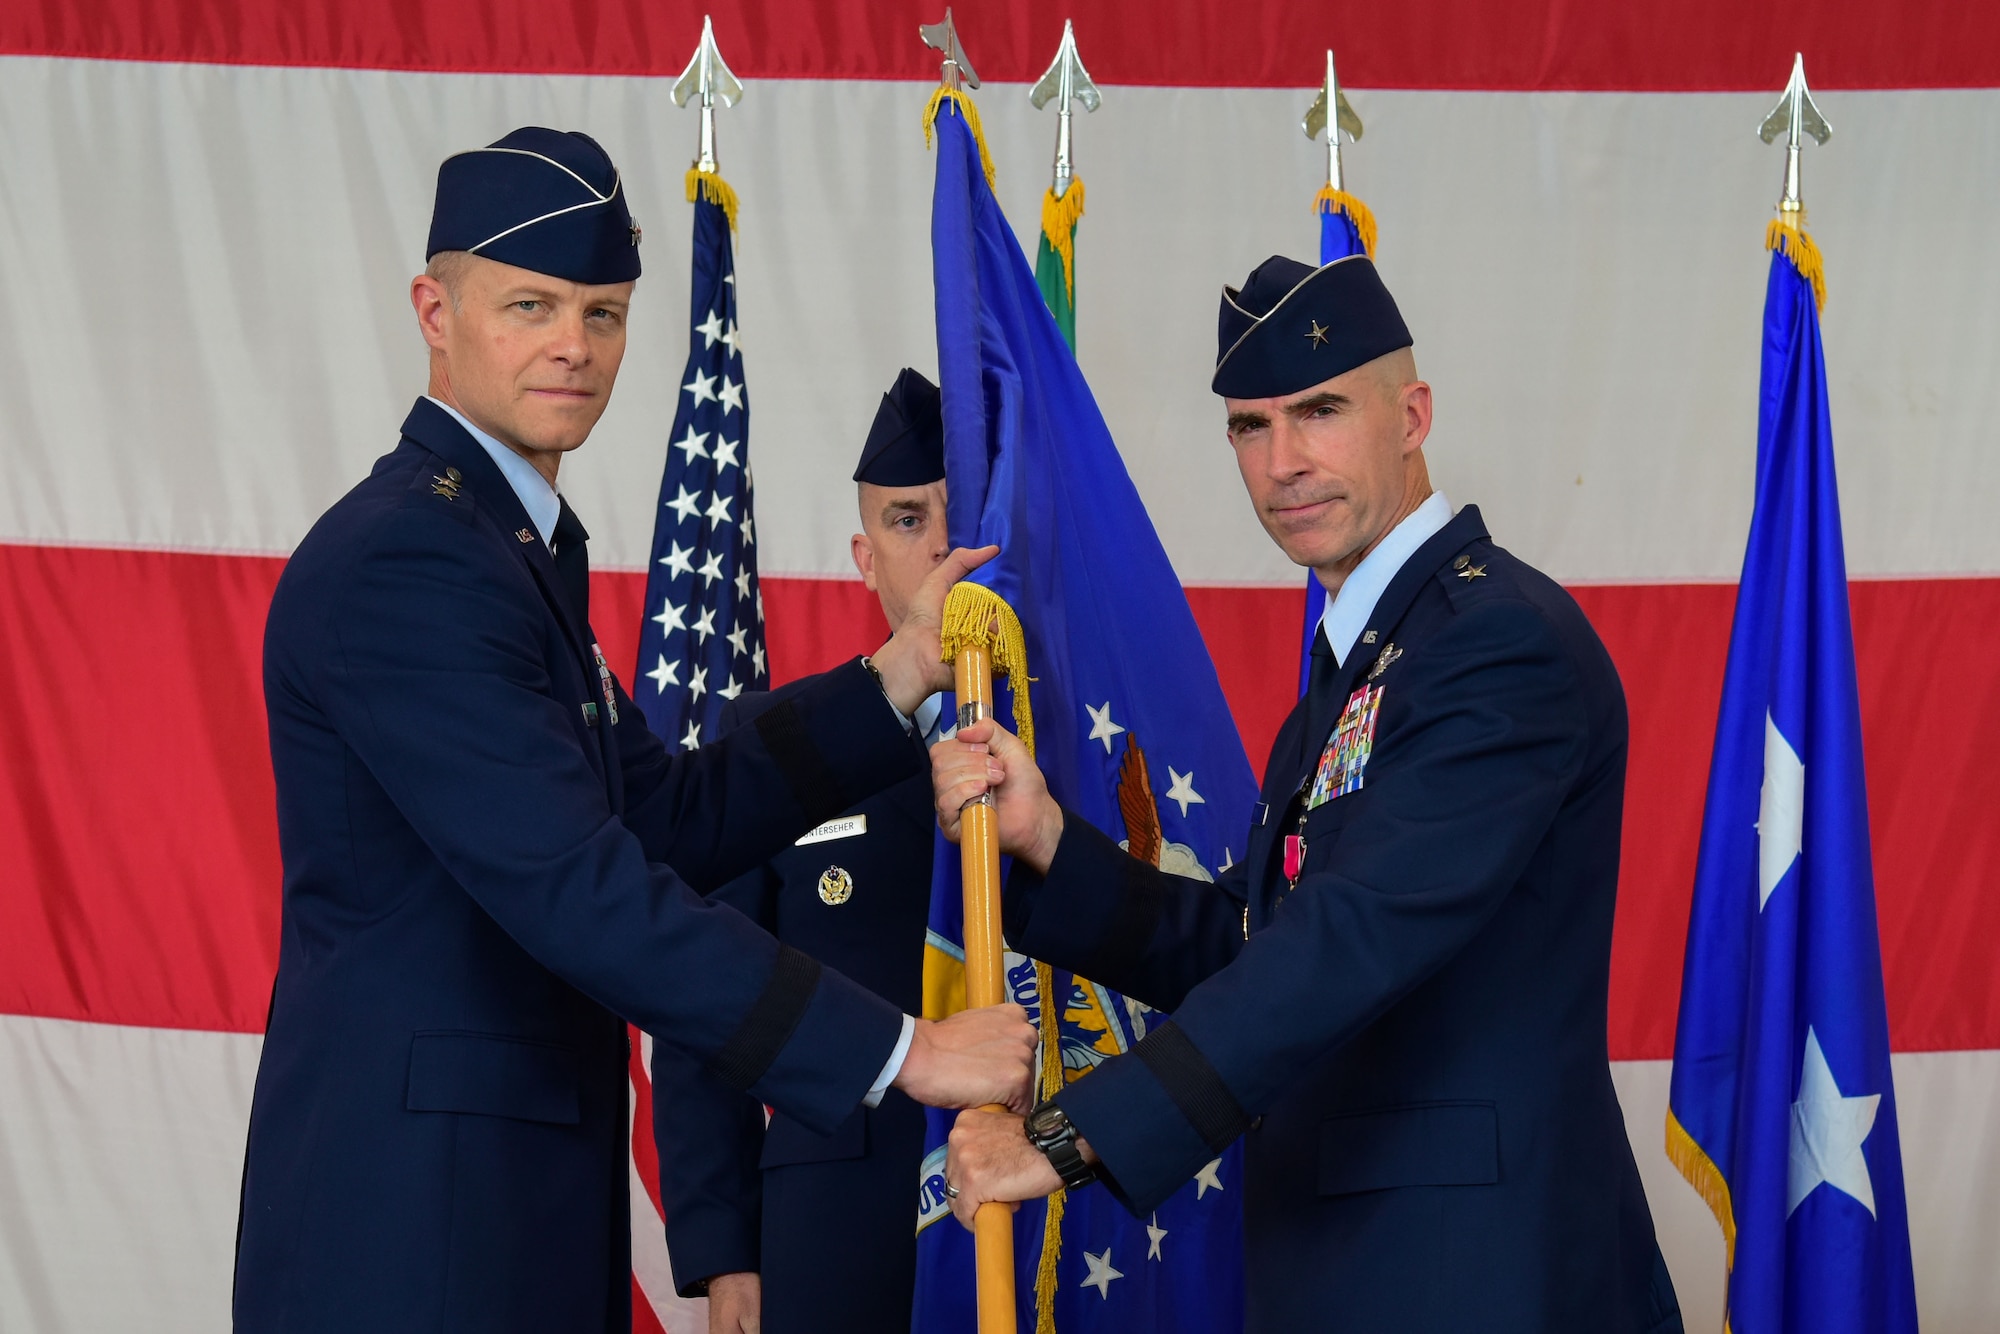 U.S. Air Force Brig. Gen. Jason Bailey, 31st Fighter Wing outgoing commander, right, relinquishes command to Maj. Gen. Derek C. France, 3rd Air Force commander, during the 31st FW change of command ceremony at Aviano Air Base